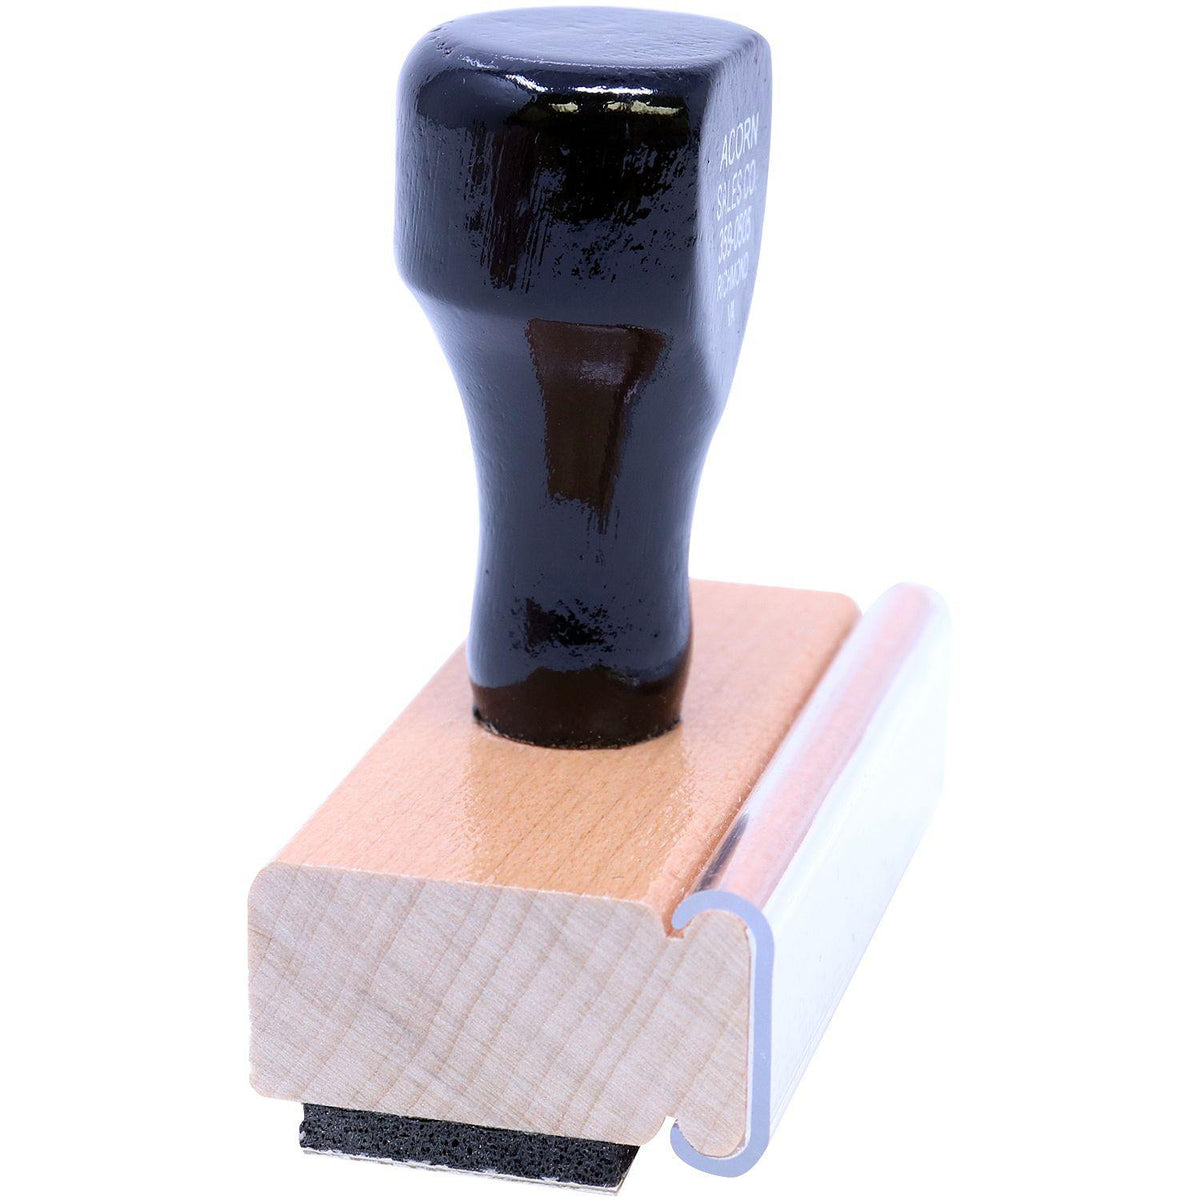 Side View of Large Bold Rough Draft Rubber Stamp at an Angle